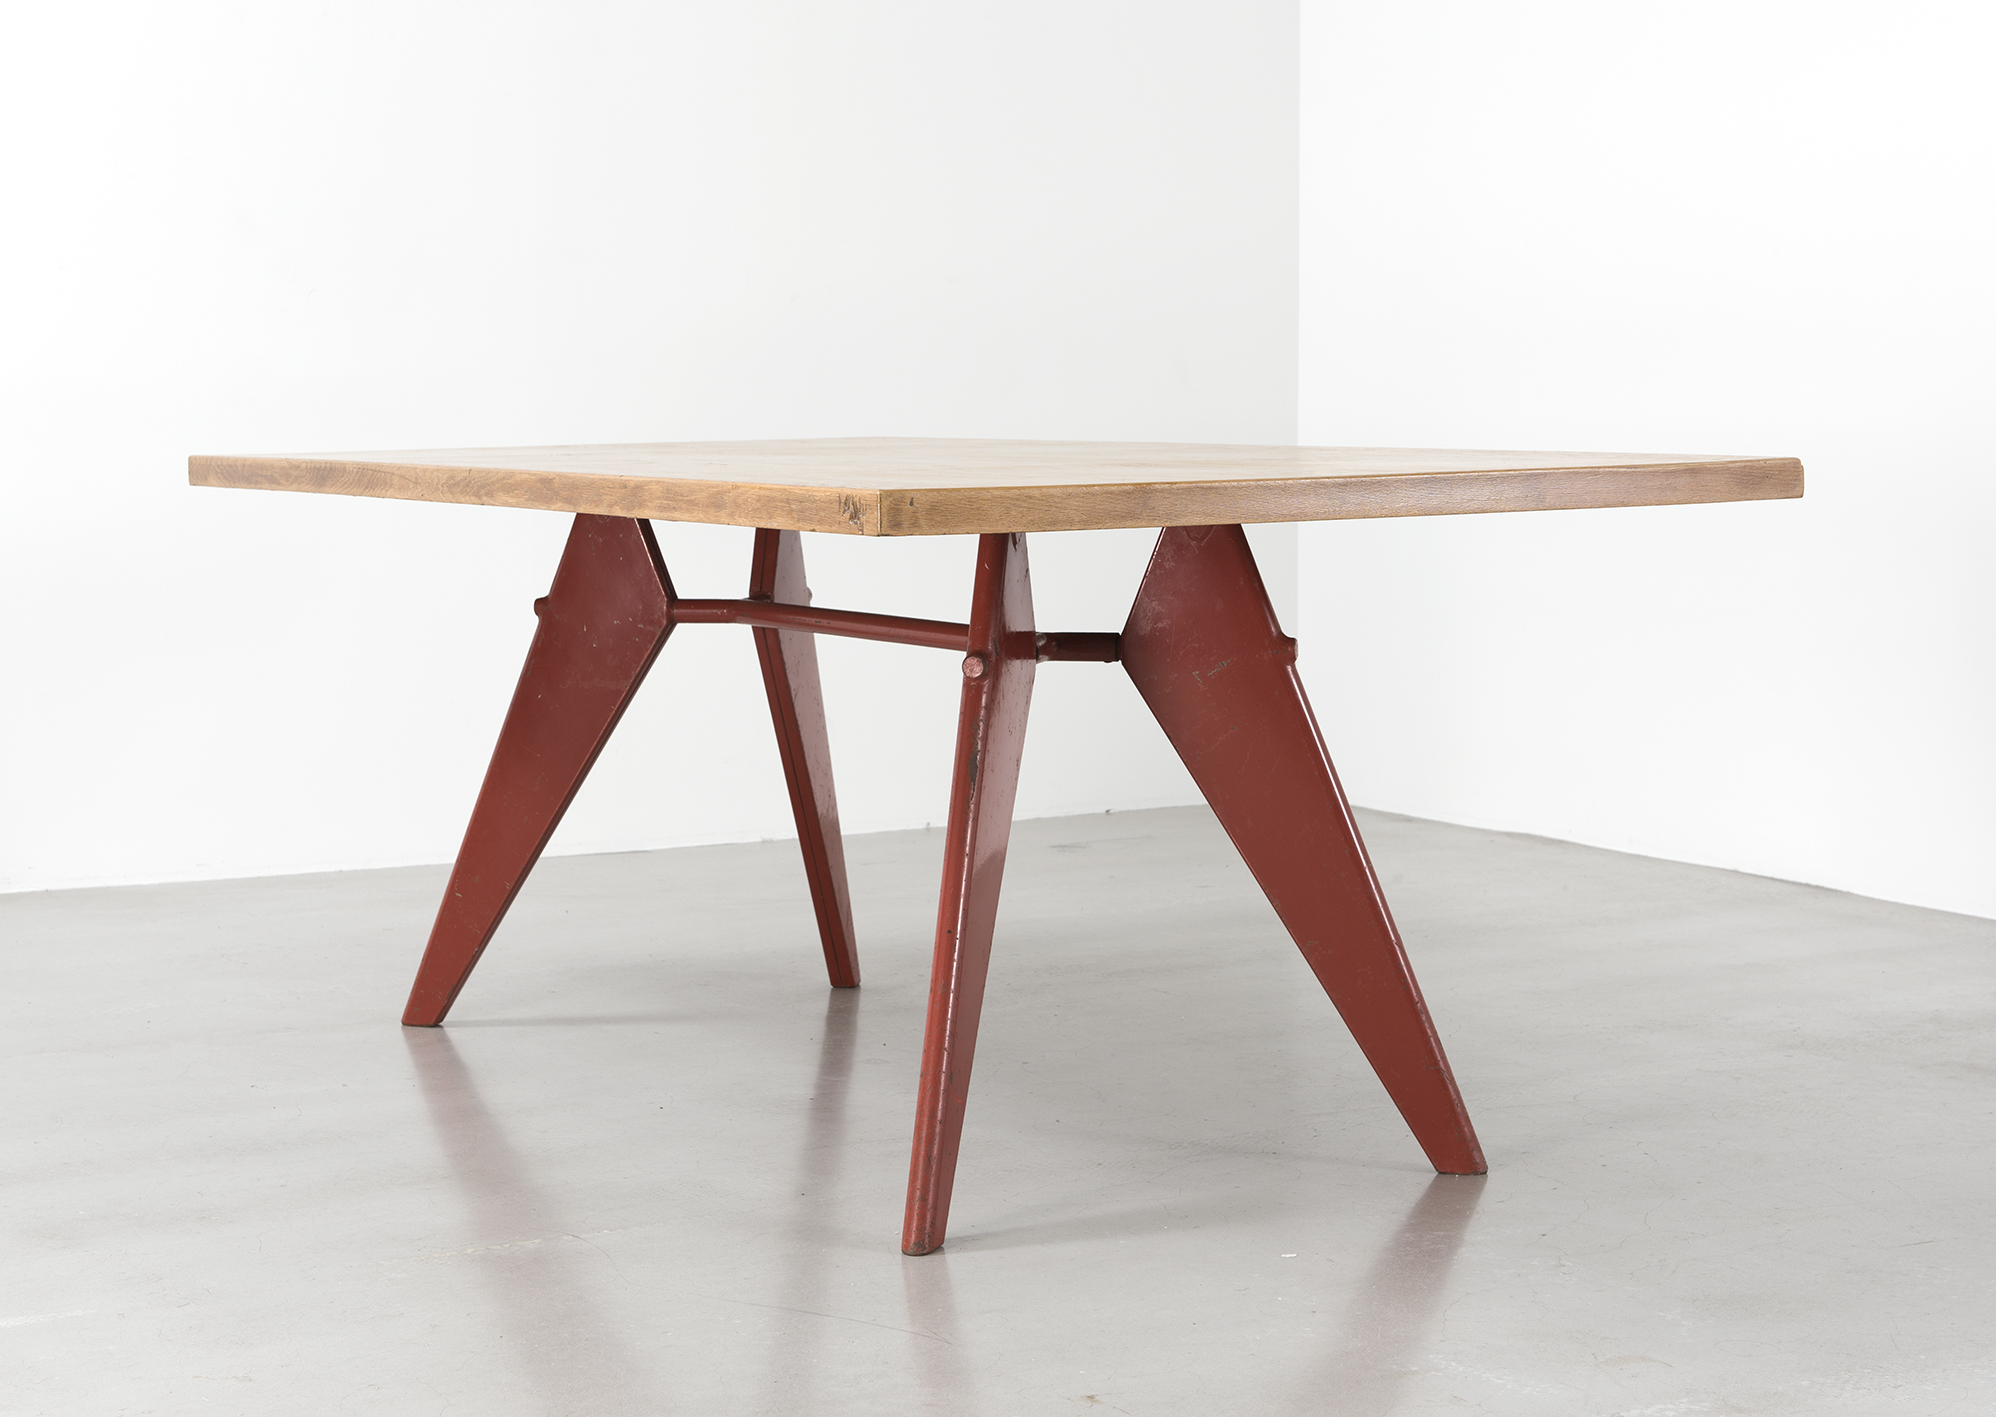 S.A.M. no. 506 table, 1951.